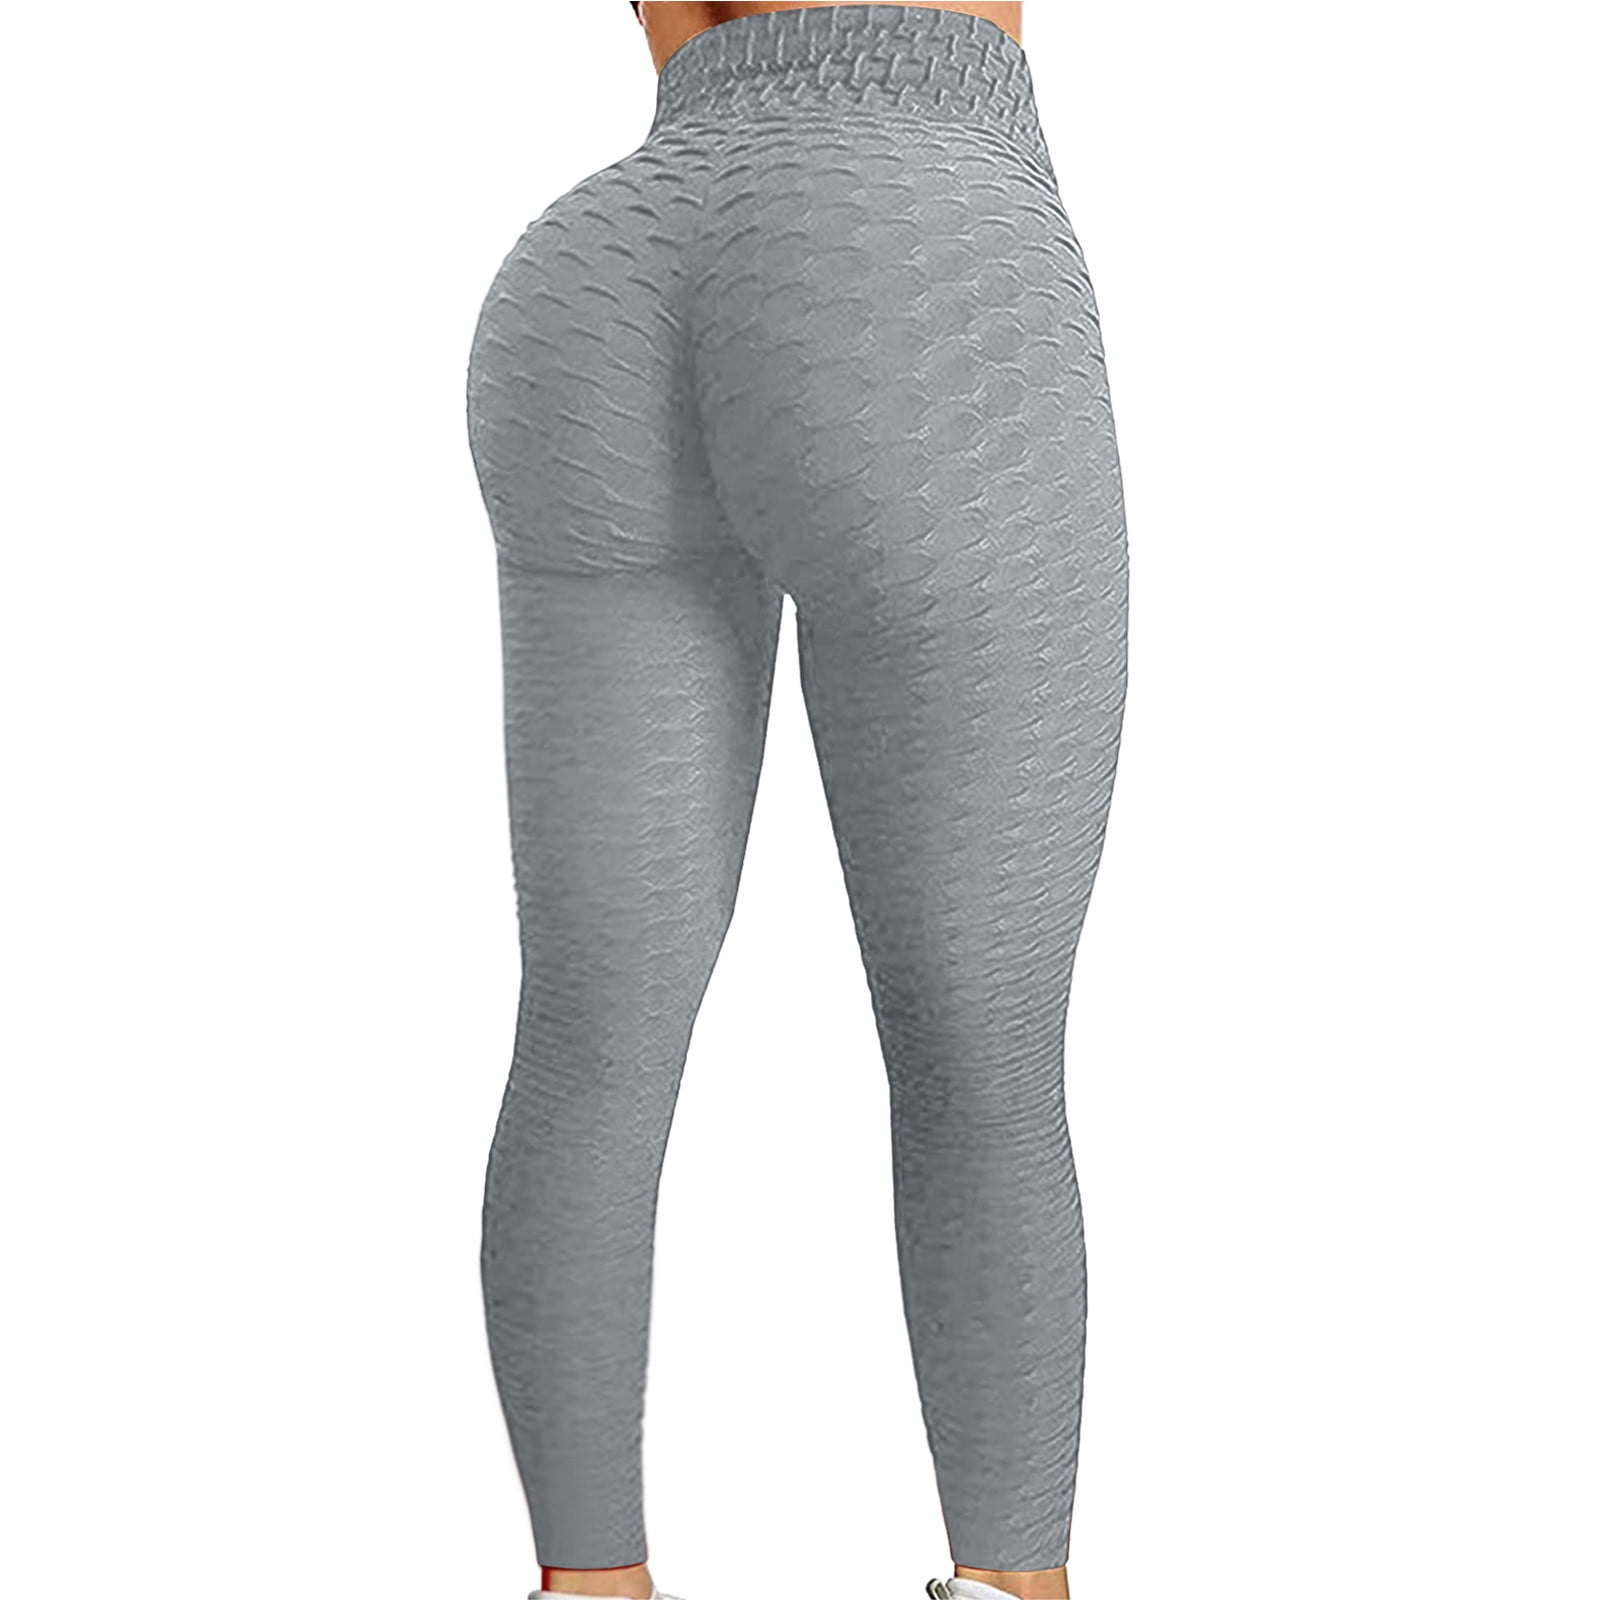 Gubotare Yoga Pants For Women With Pockets Women's Yoga Pants with